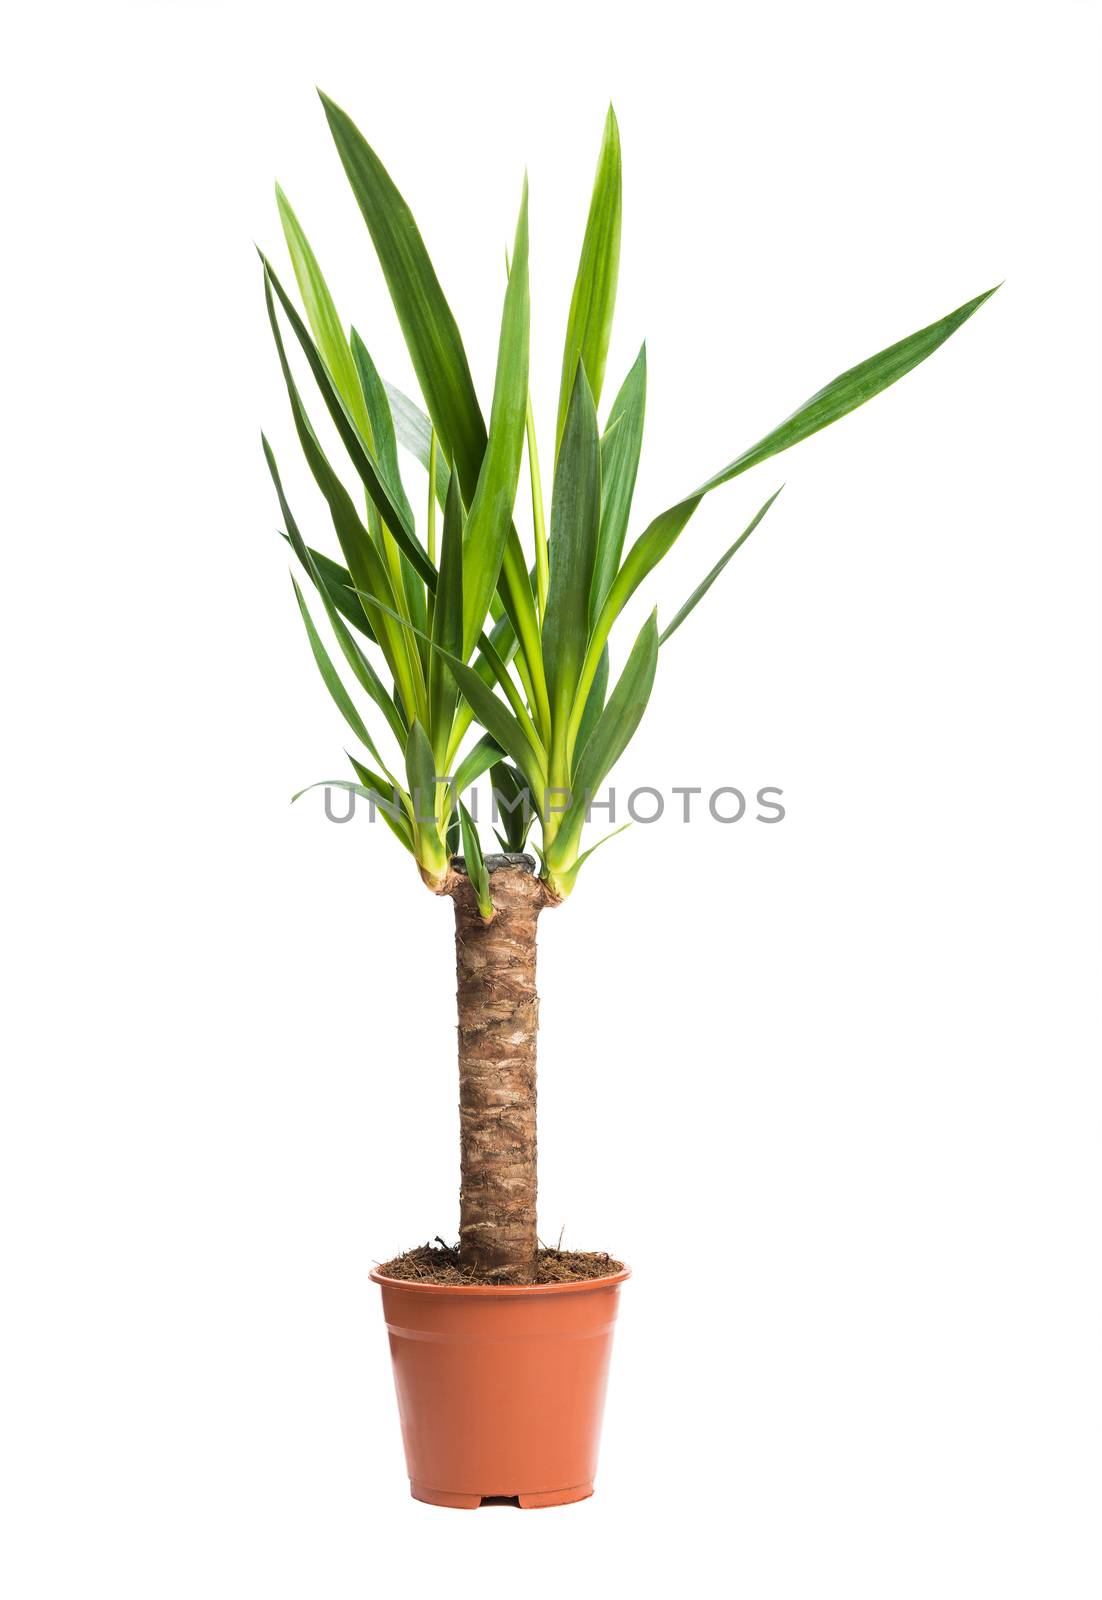 Houseplant Yucca A potted plant isolated on white background by Draw05